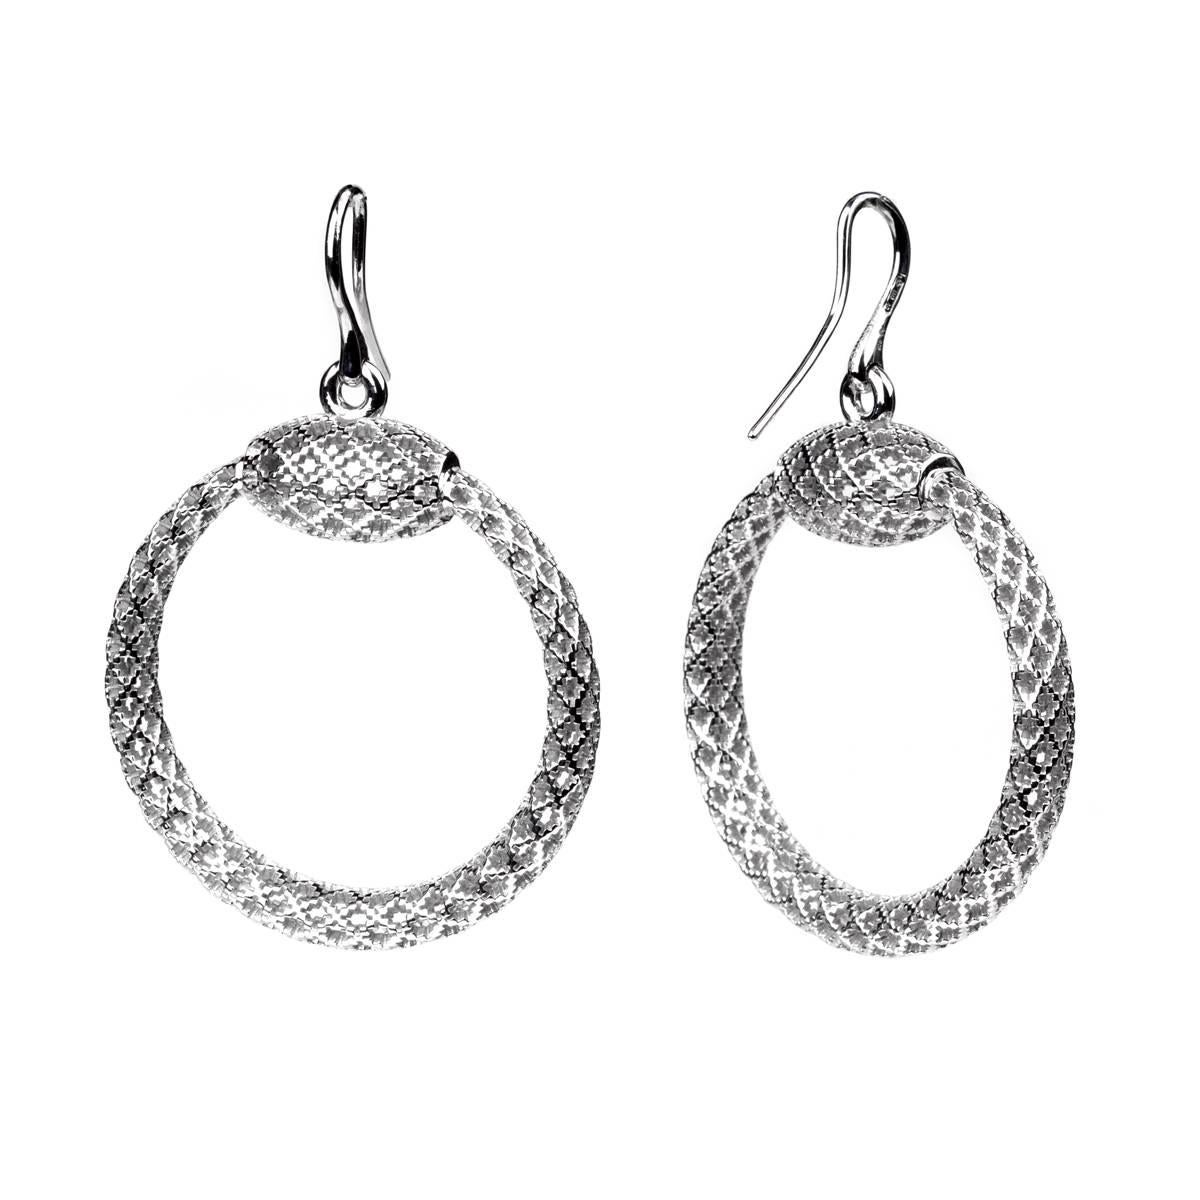 A fabulous pair of Gucci earrings adorned with the Diamantissima motif in sterling silver.